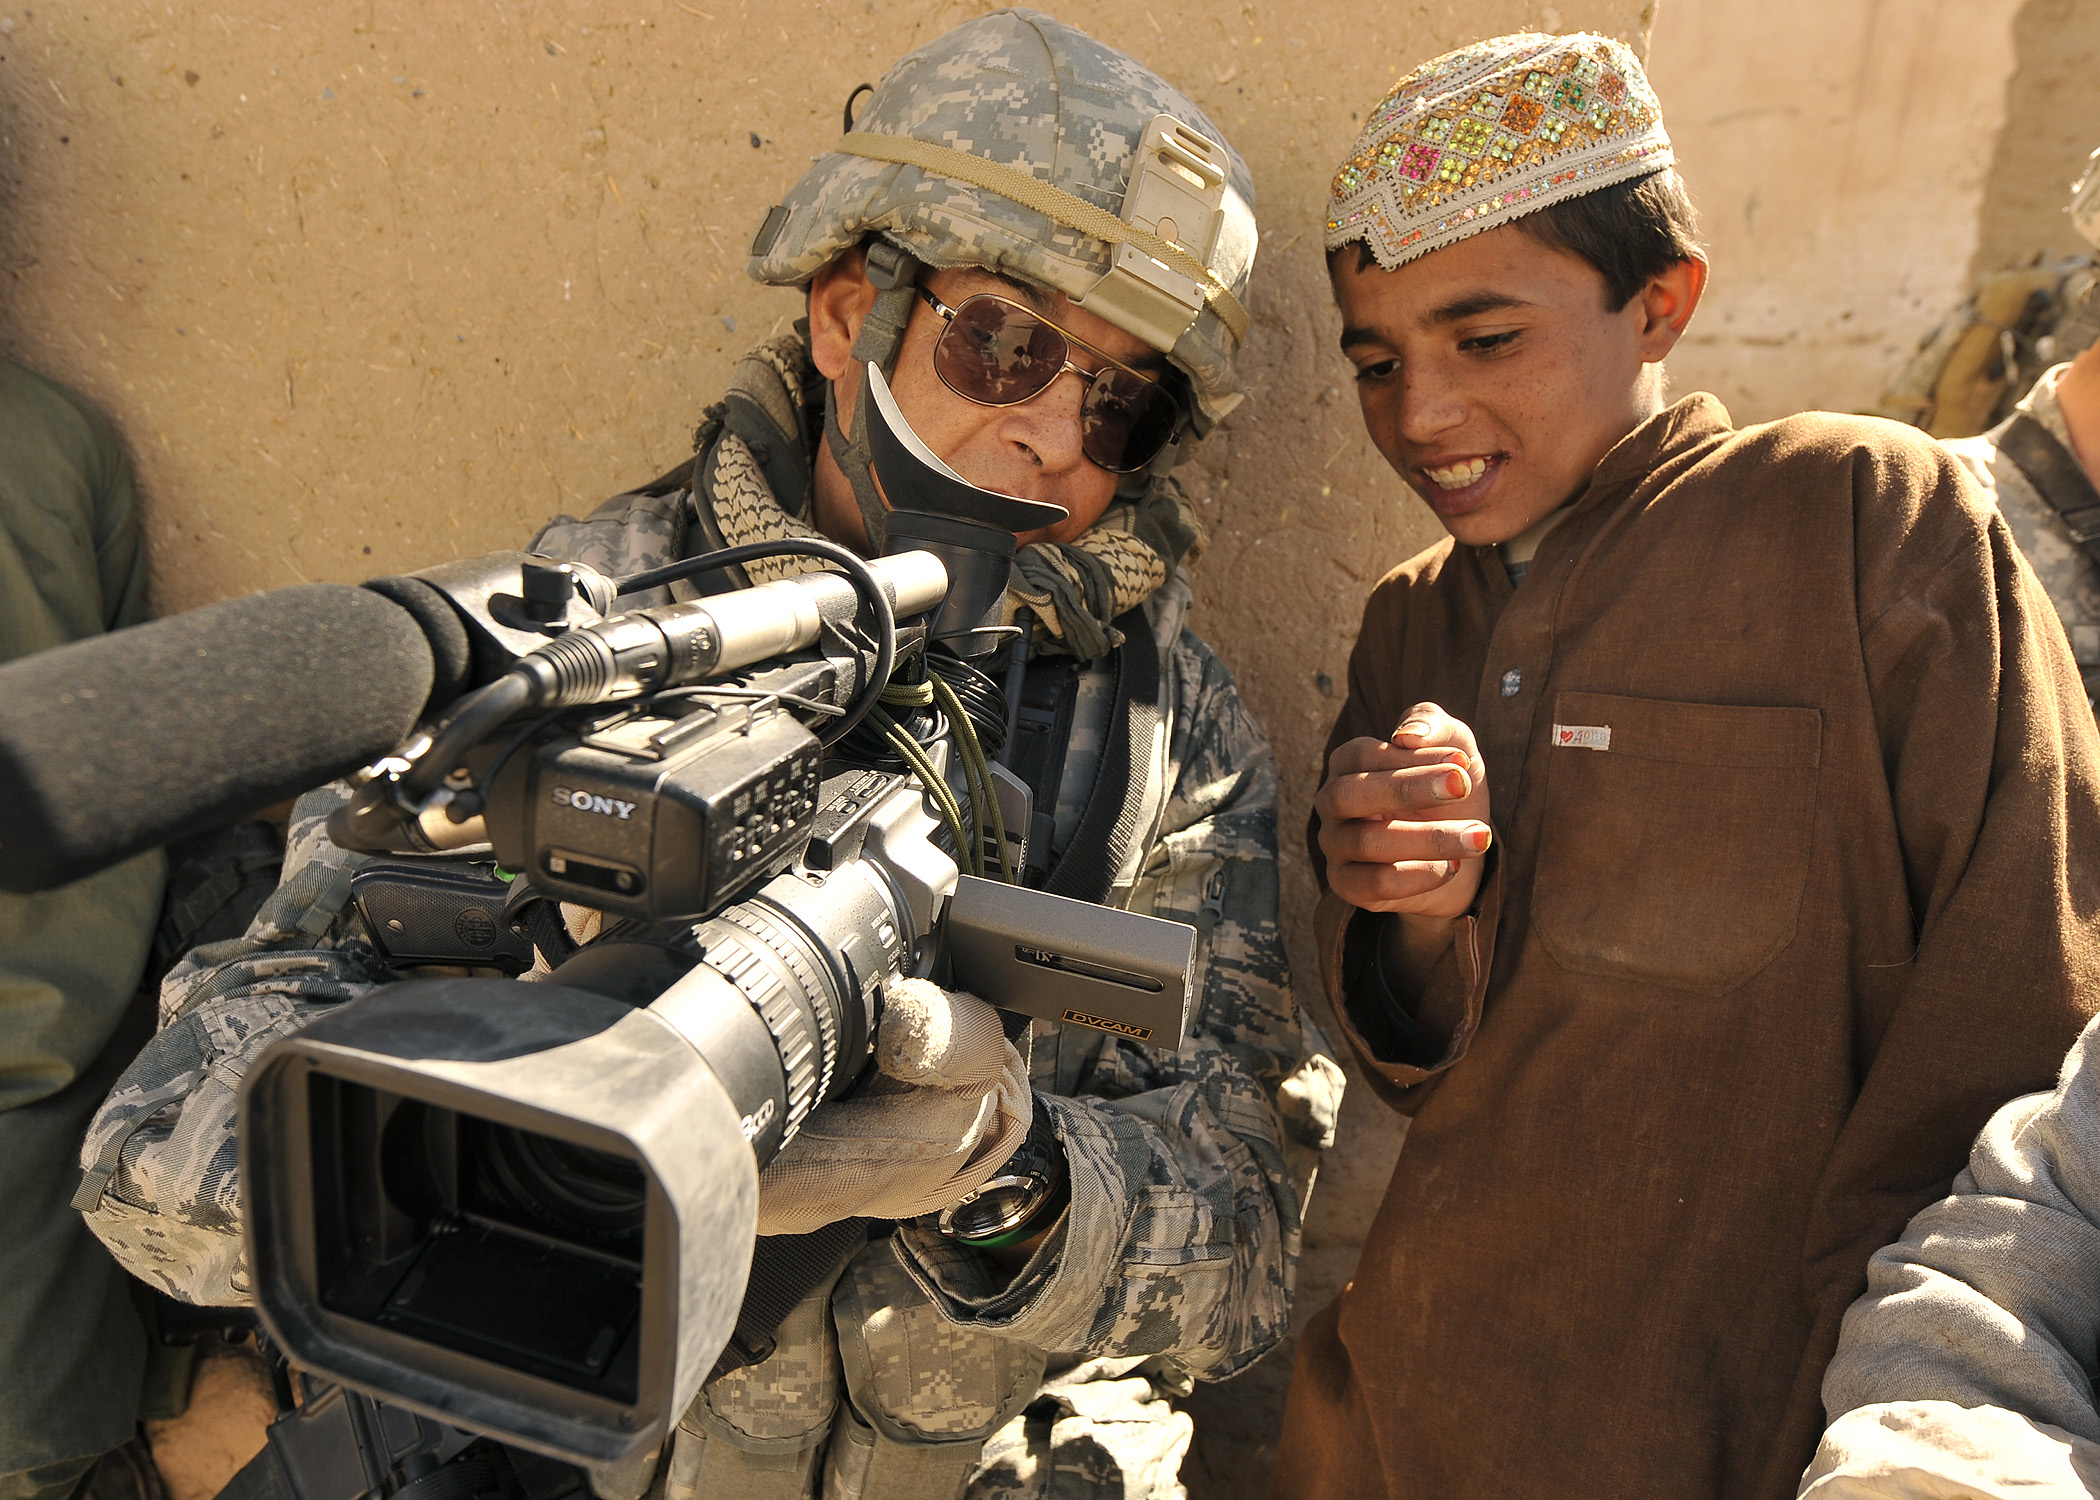 U.S. Air Force Master Sgt. Robert Carreon, with the 4th Combat Camera Squadron, shows his video recording to a student at the Wazi Muhammad Khan School in Hutal, Afghanistan, Jan. 7, 2010 100107-F-PU334-121